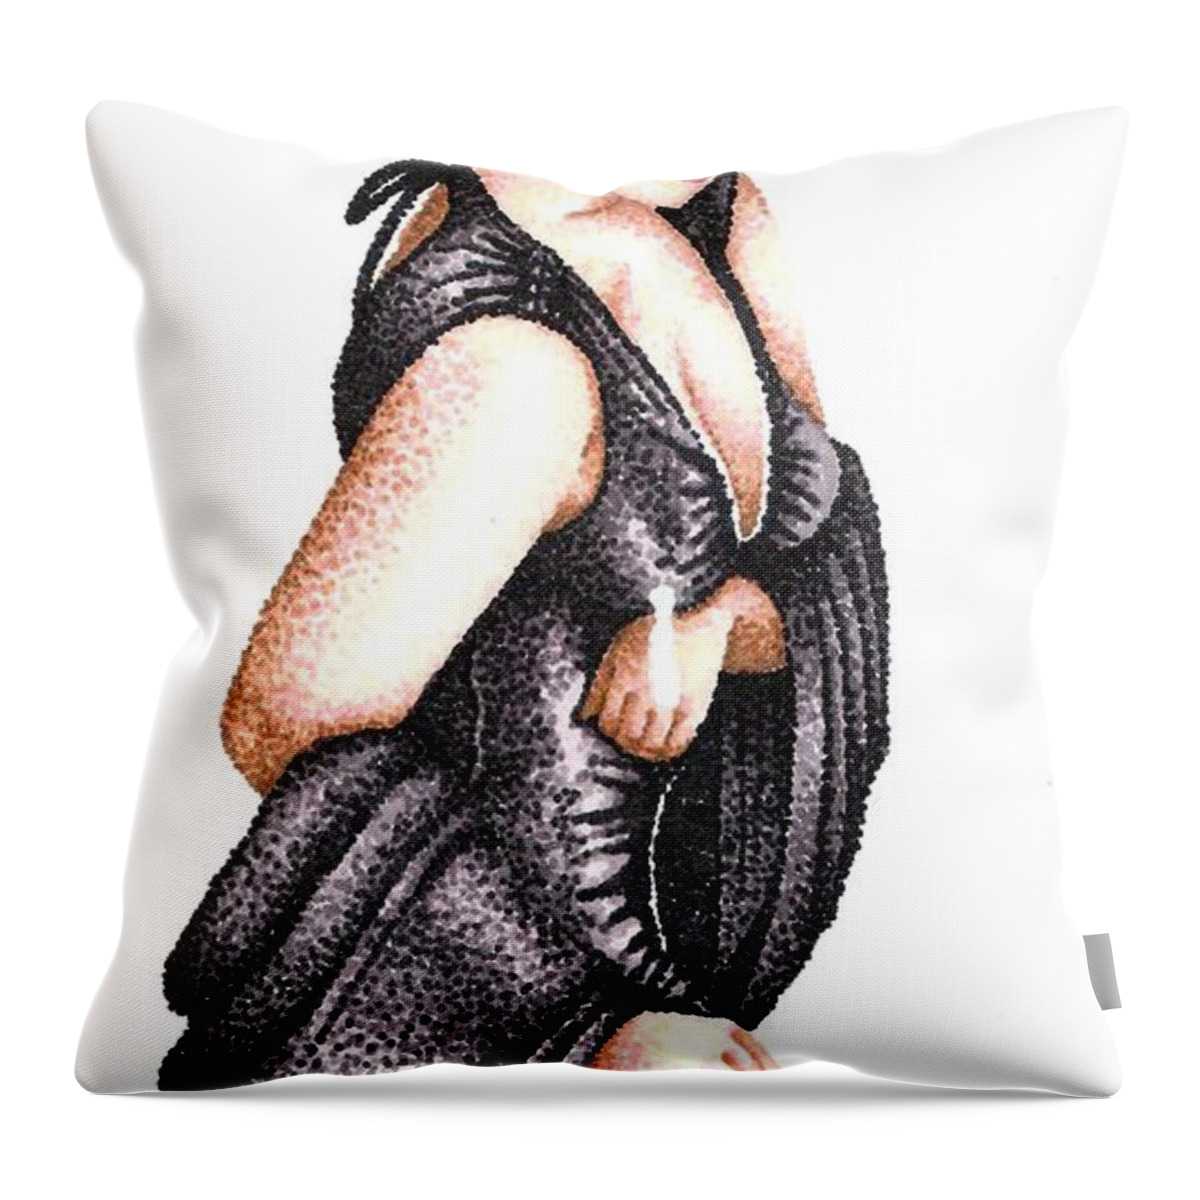 French Woman Throw Pillow featuring the drawing Retouch by Scarlett Royale